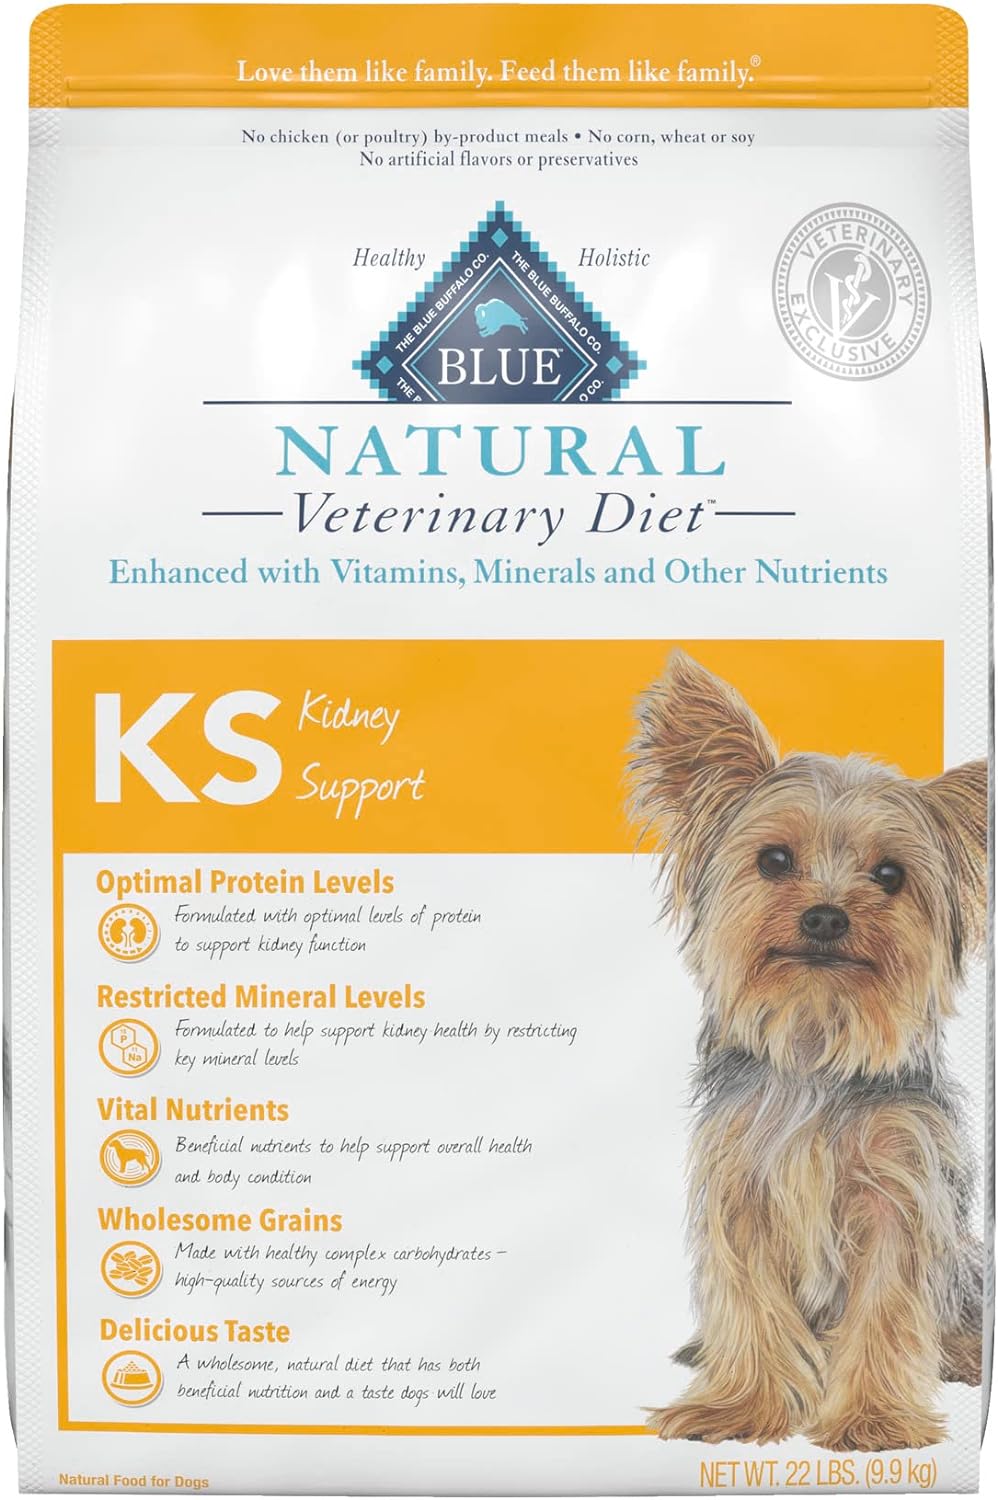 Blue Natural Veterinary Diet KS Kidney Support Dry Dog Food – Gallery Image 1